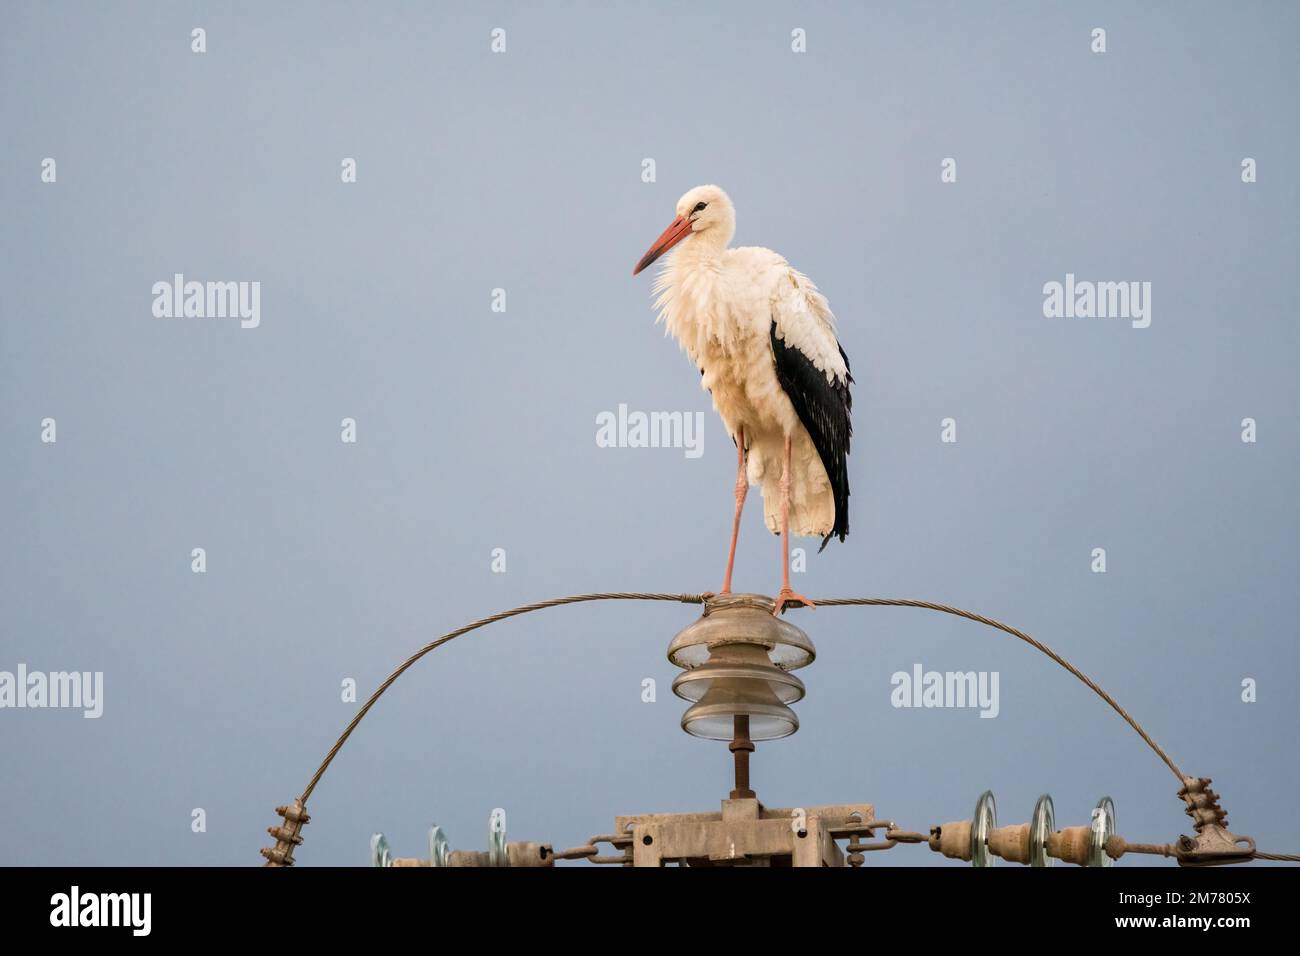 white stork, Ciconia ciconia, perched on top of an tranmission tower, Catalonia, Spain Stock Photo